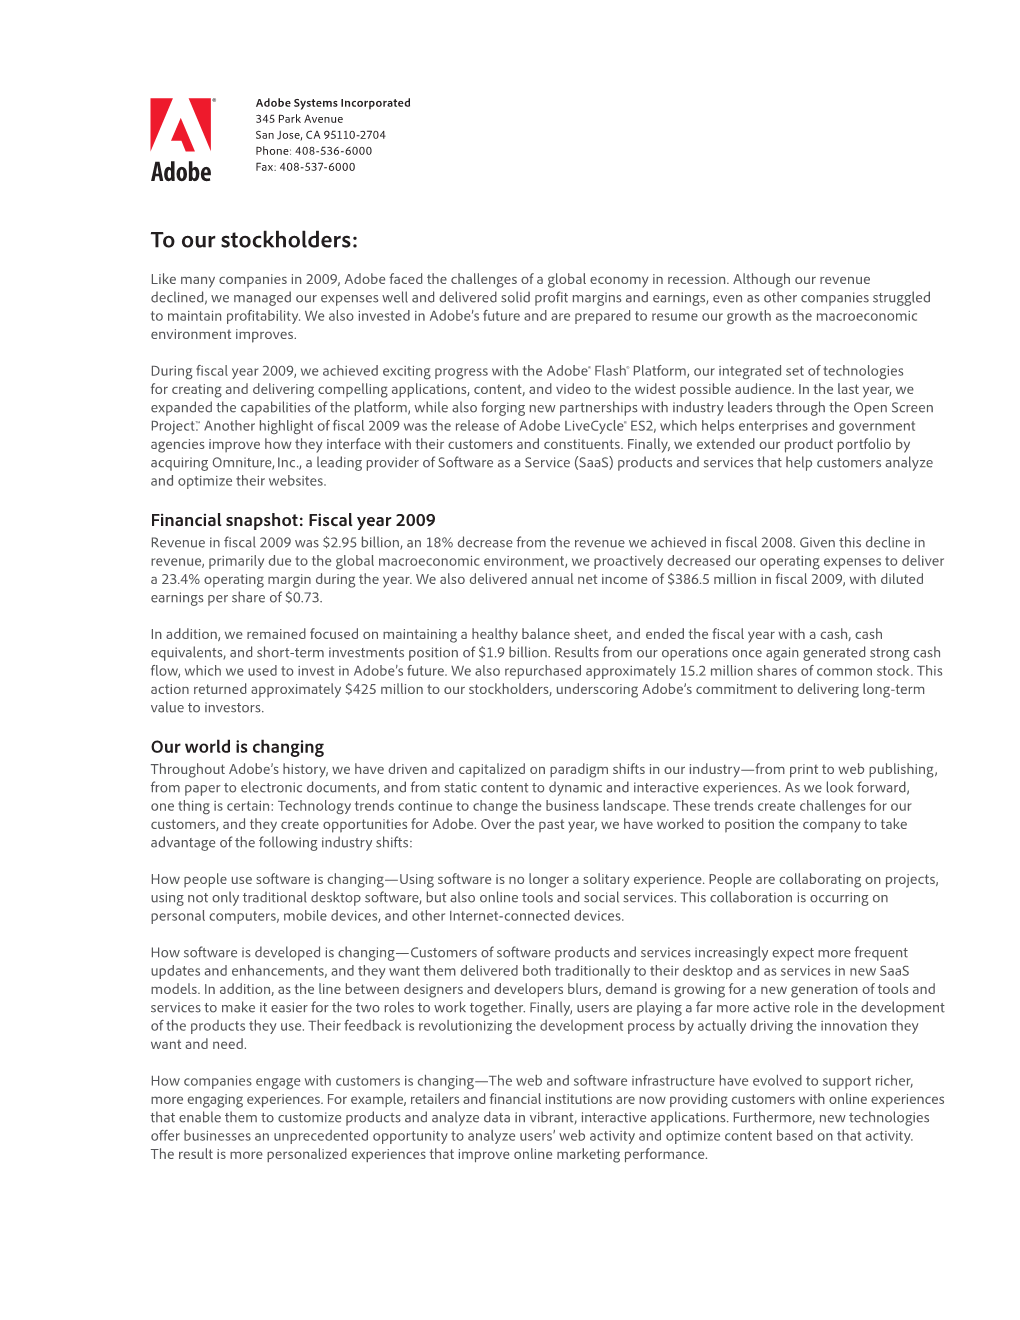 Adobe Systems Incorporated 2010 Letter to Stockholders